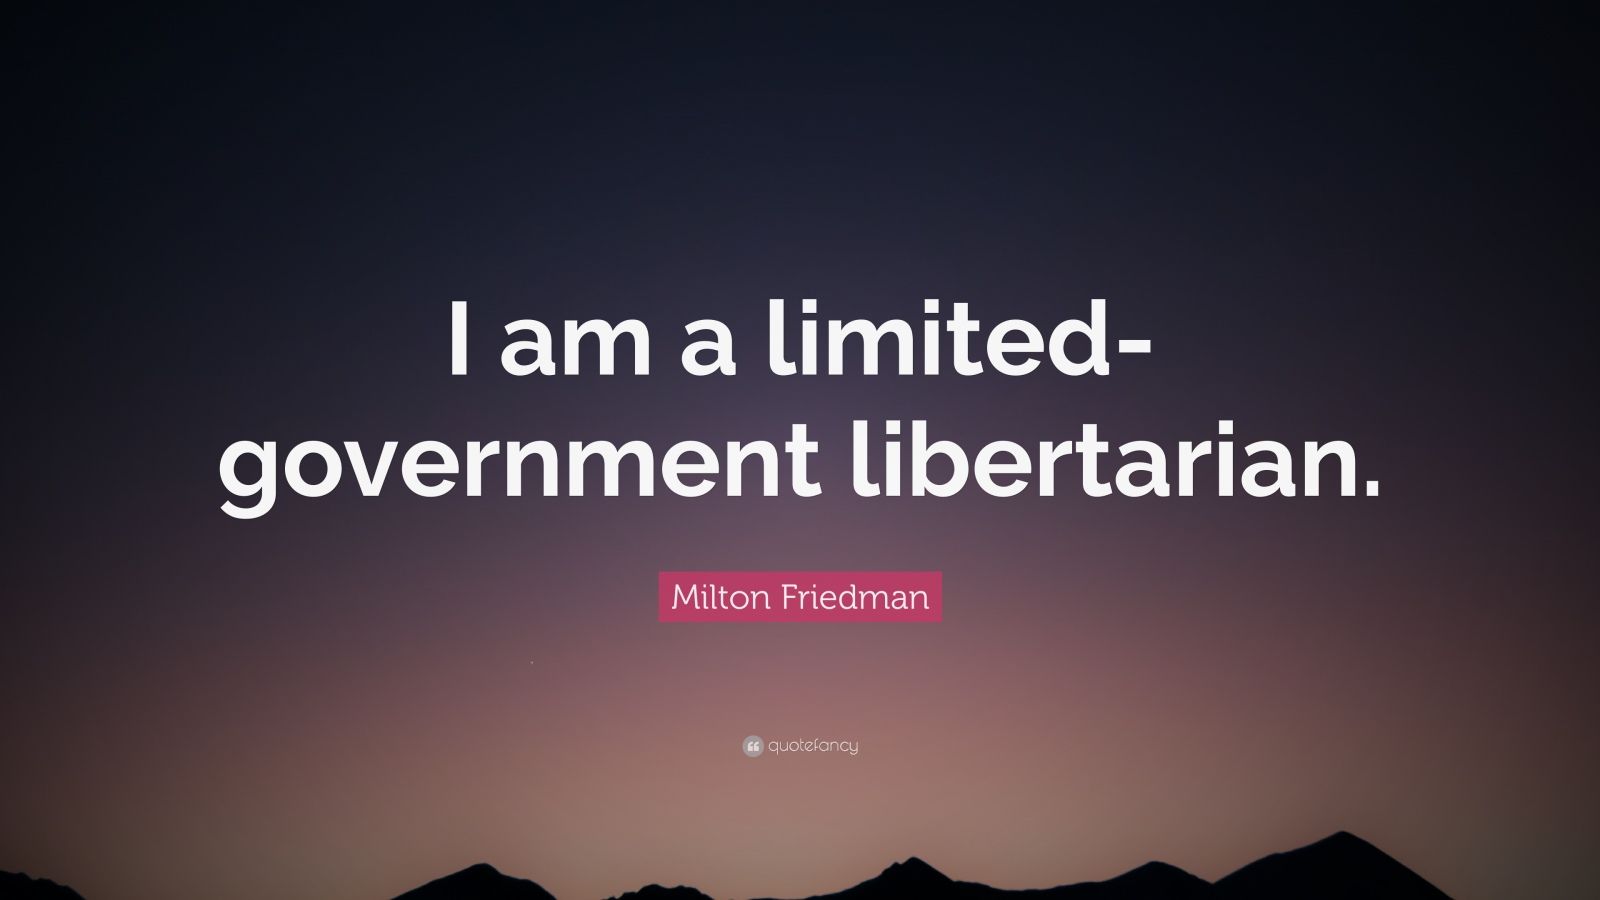 Milton Friedman Quote: “I Am A Limited Government Libertarian